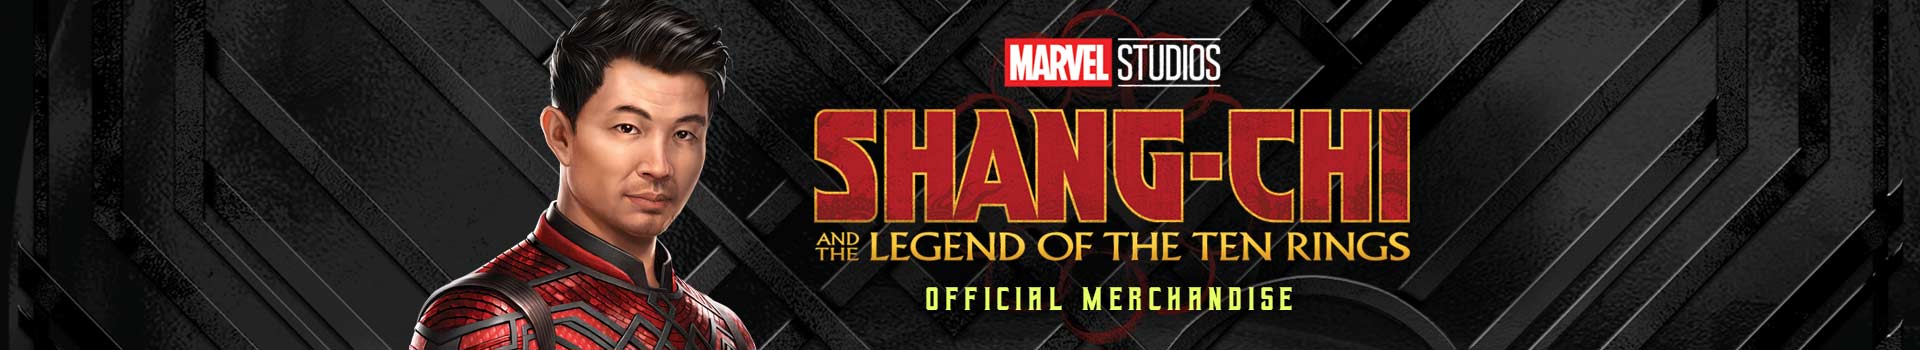 Shang Chi - Official Merchandise